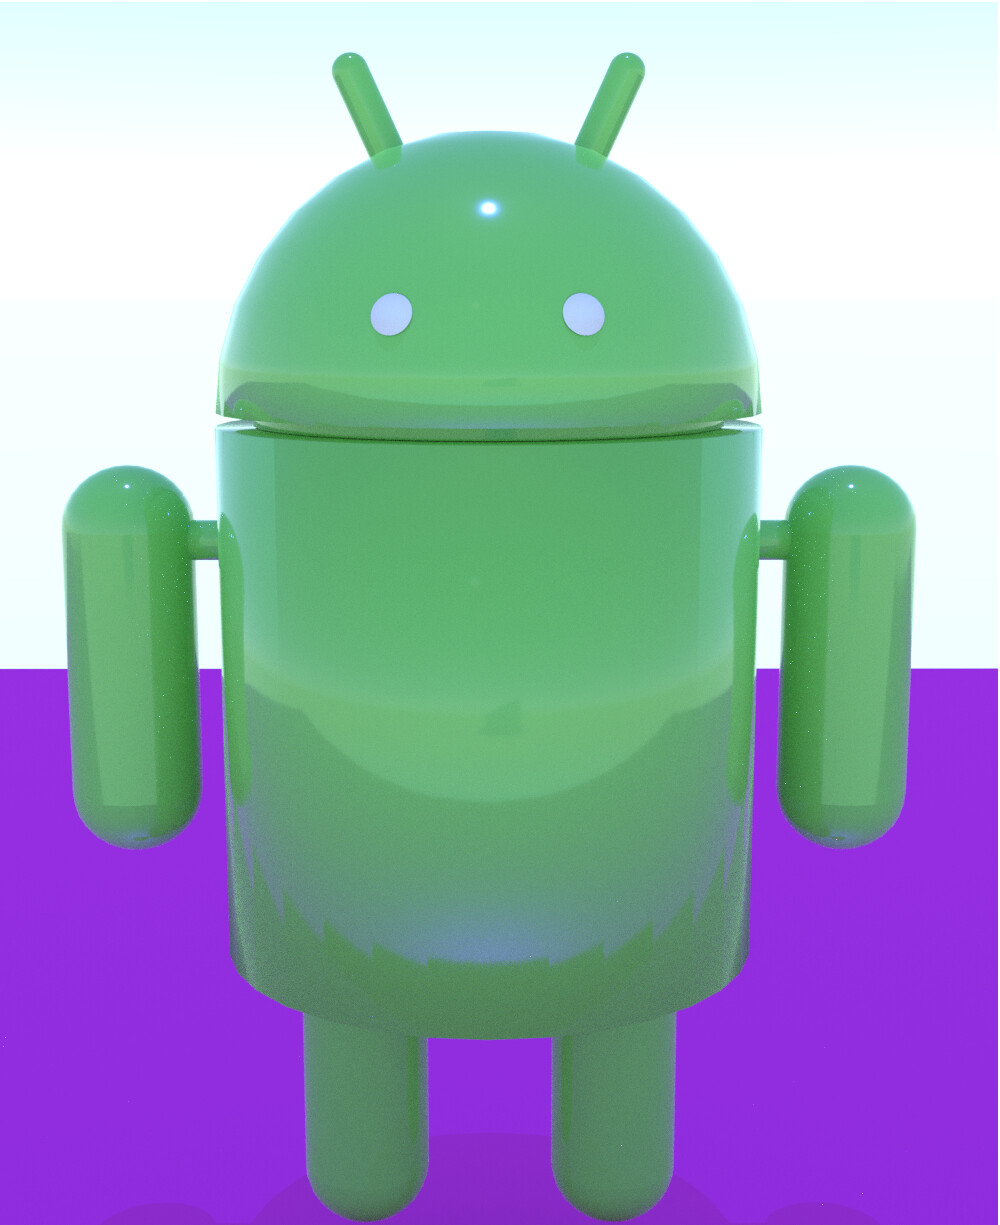 Android rebranding: Bugdroid running around in 3D - Design Compass